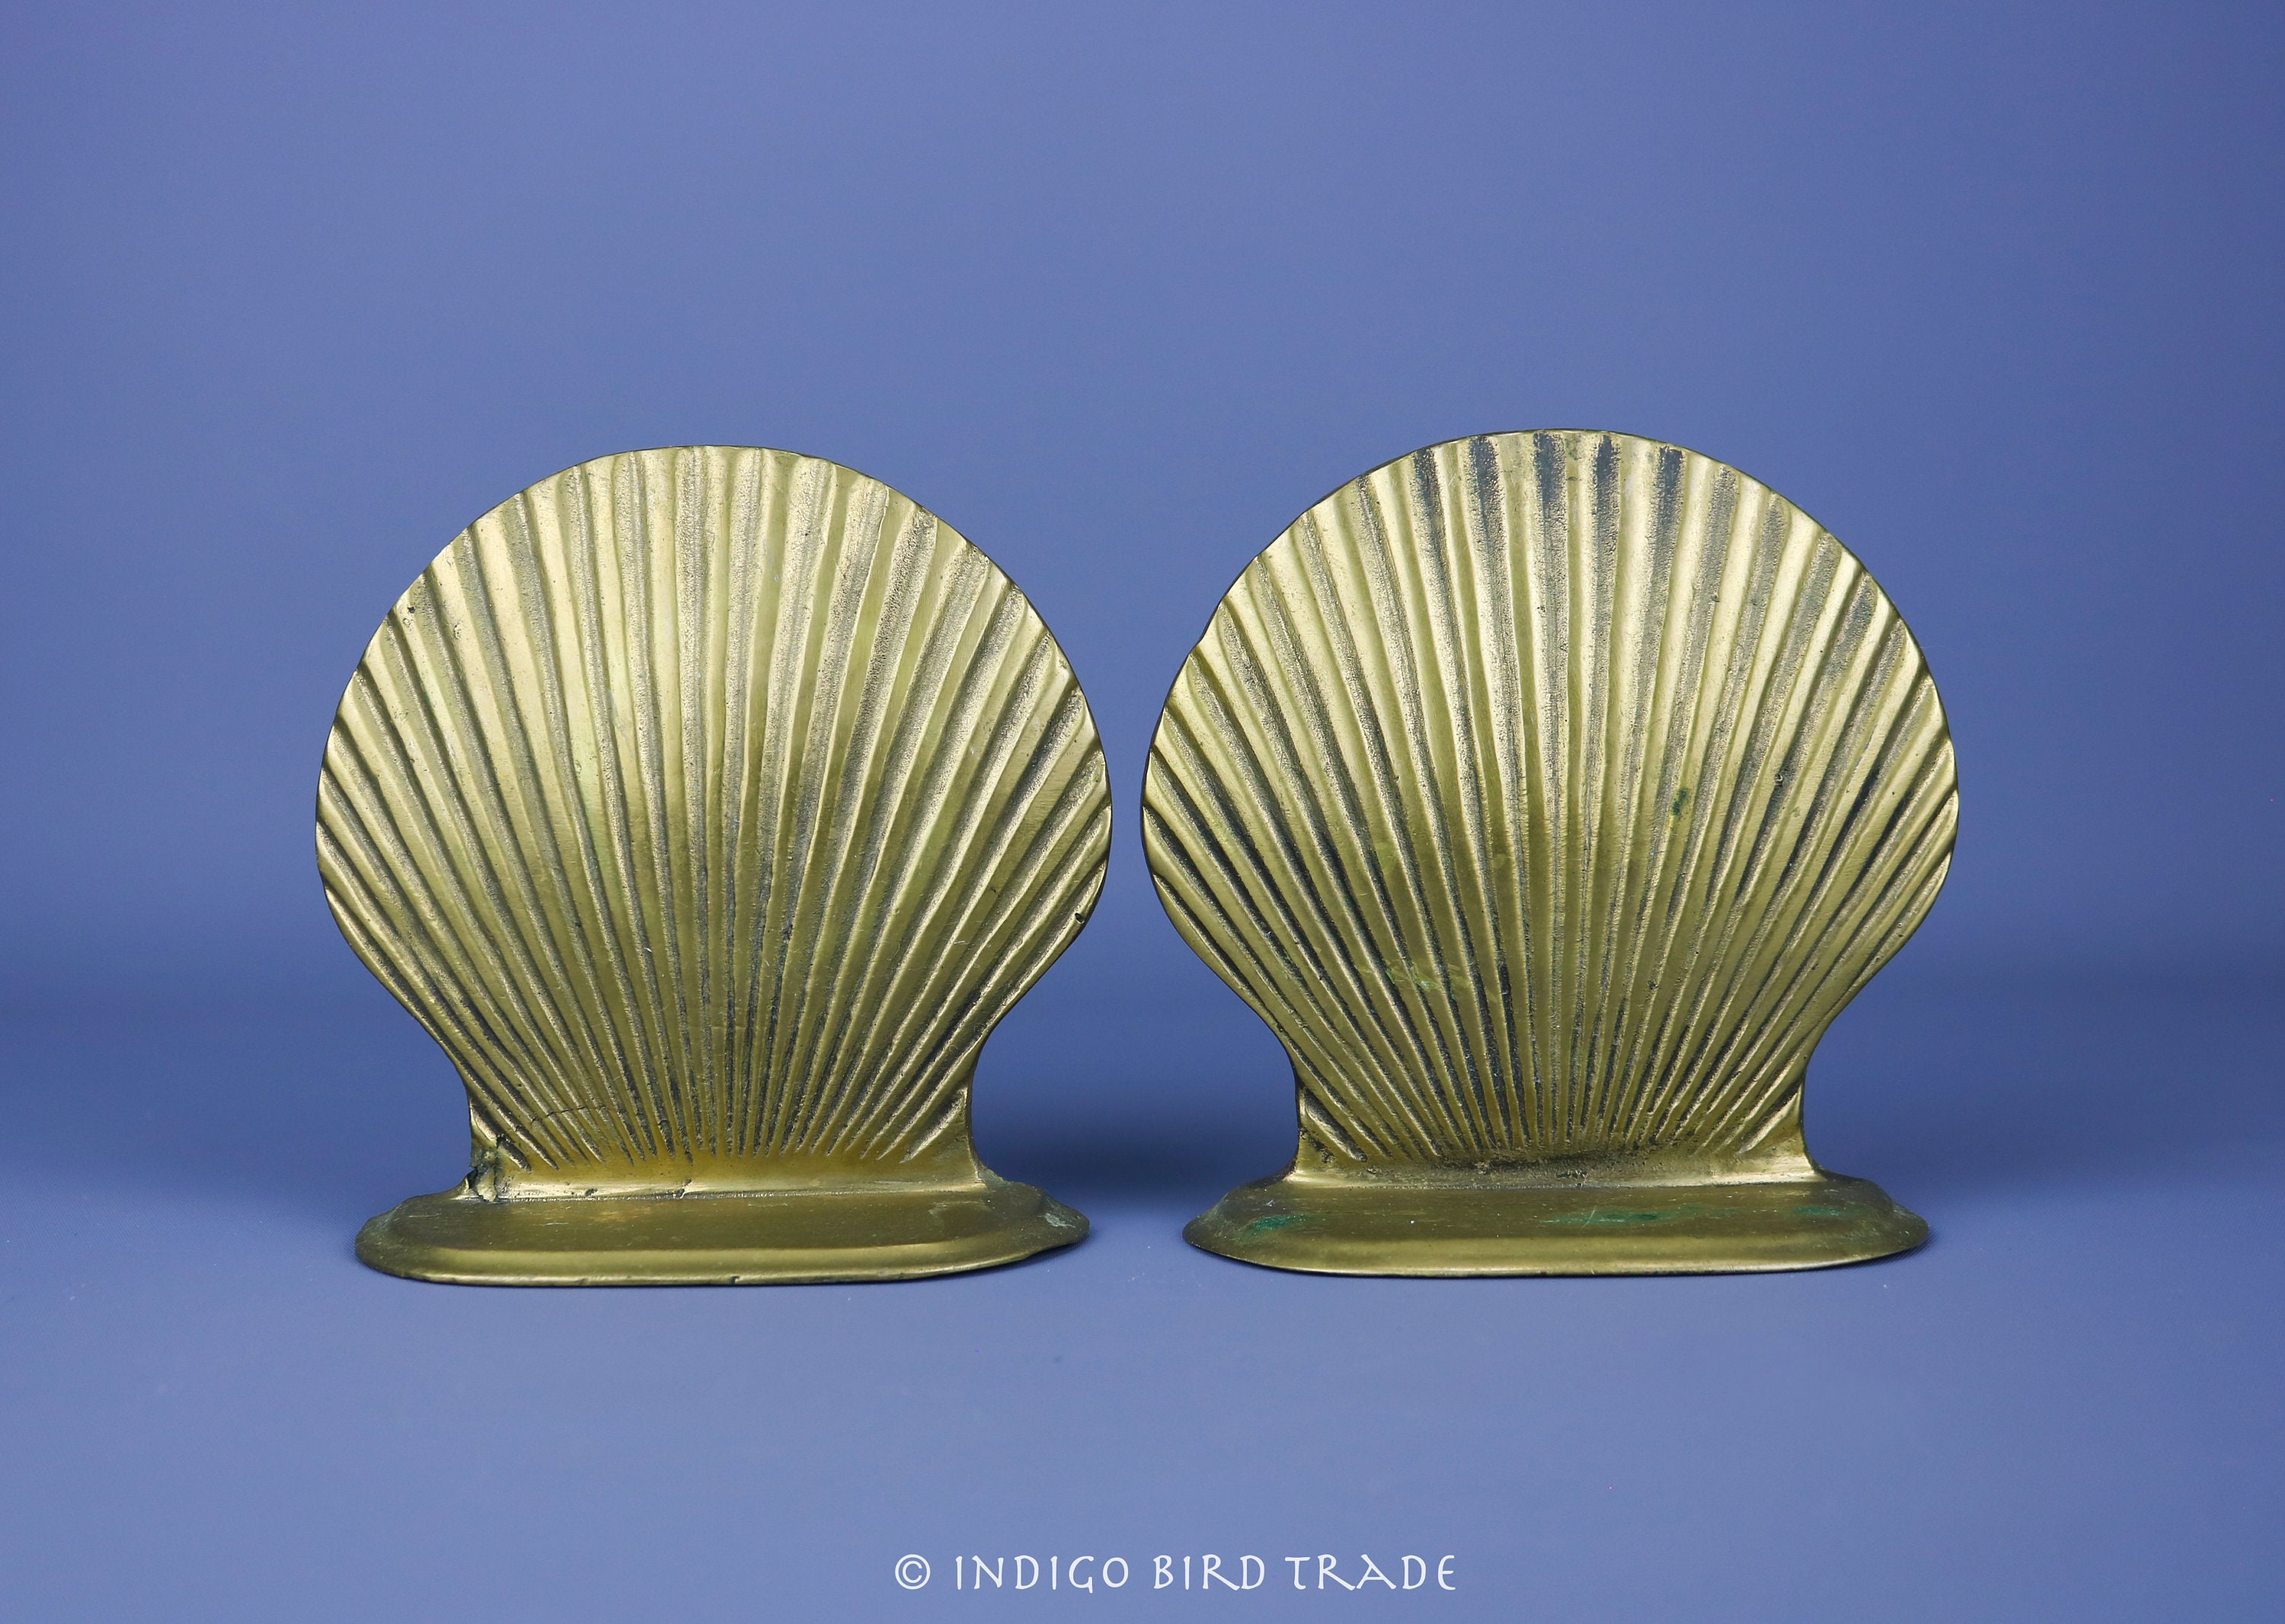 Vintage Solid Brass Bookends Seashell Pair Art Deco Beach MCM Nautical